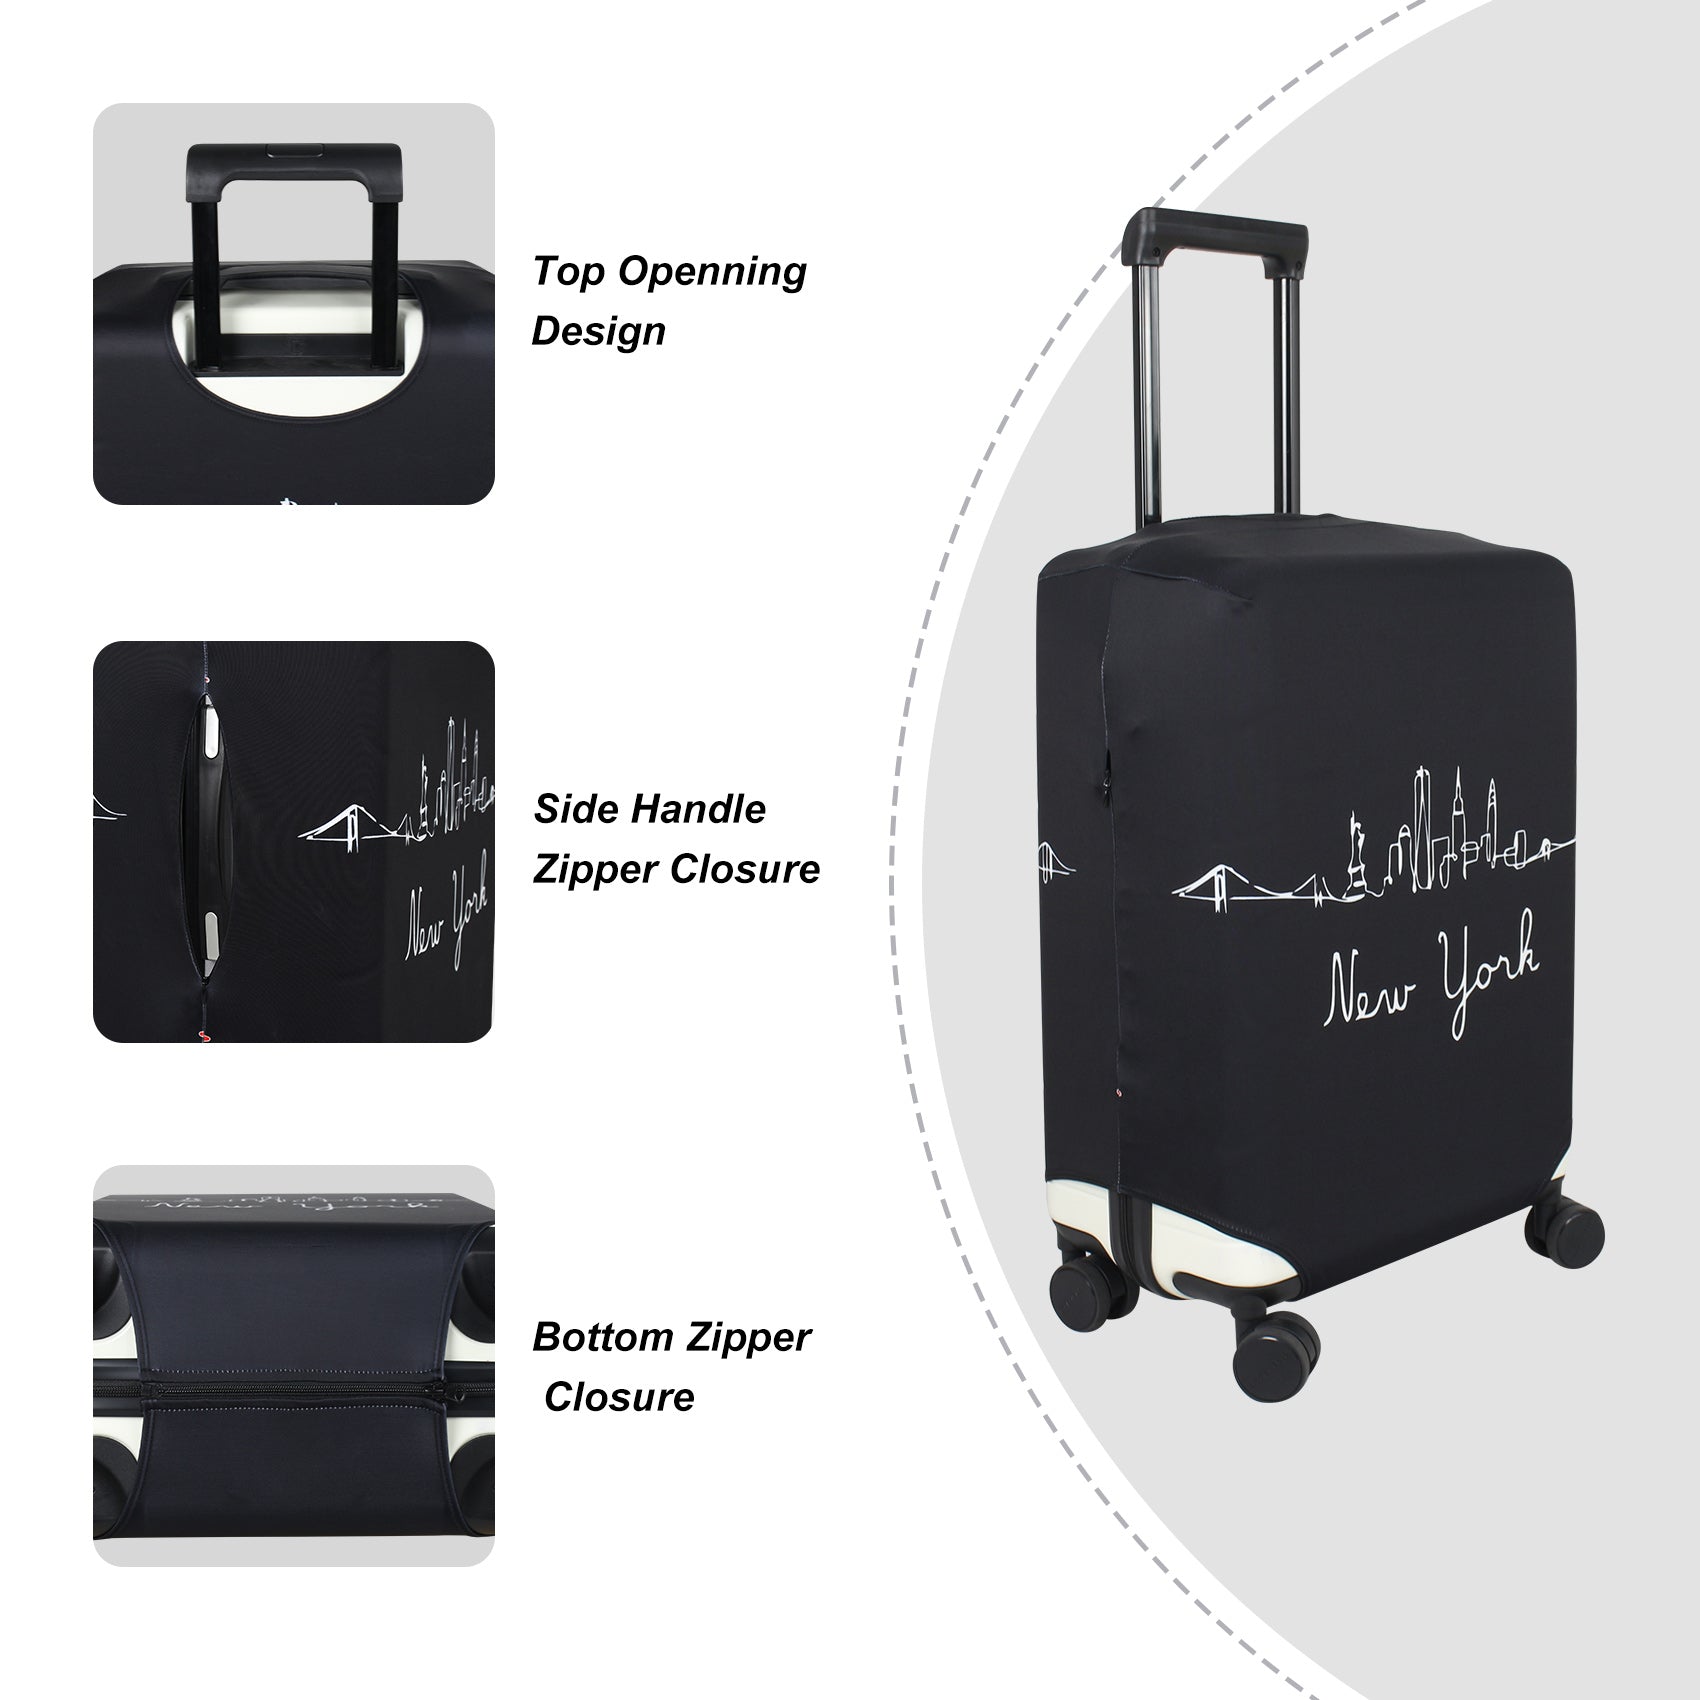 Explore Land Travel Luggage Cover Suitcase Protector Fits 18-32 inch Luggage